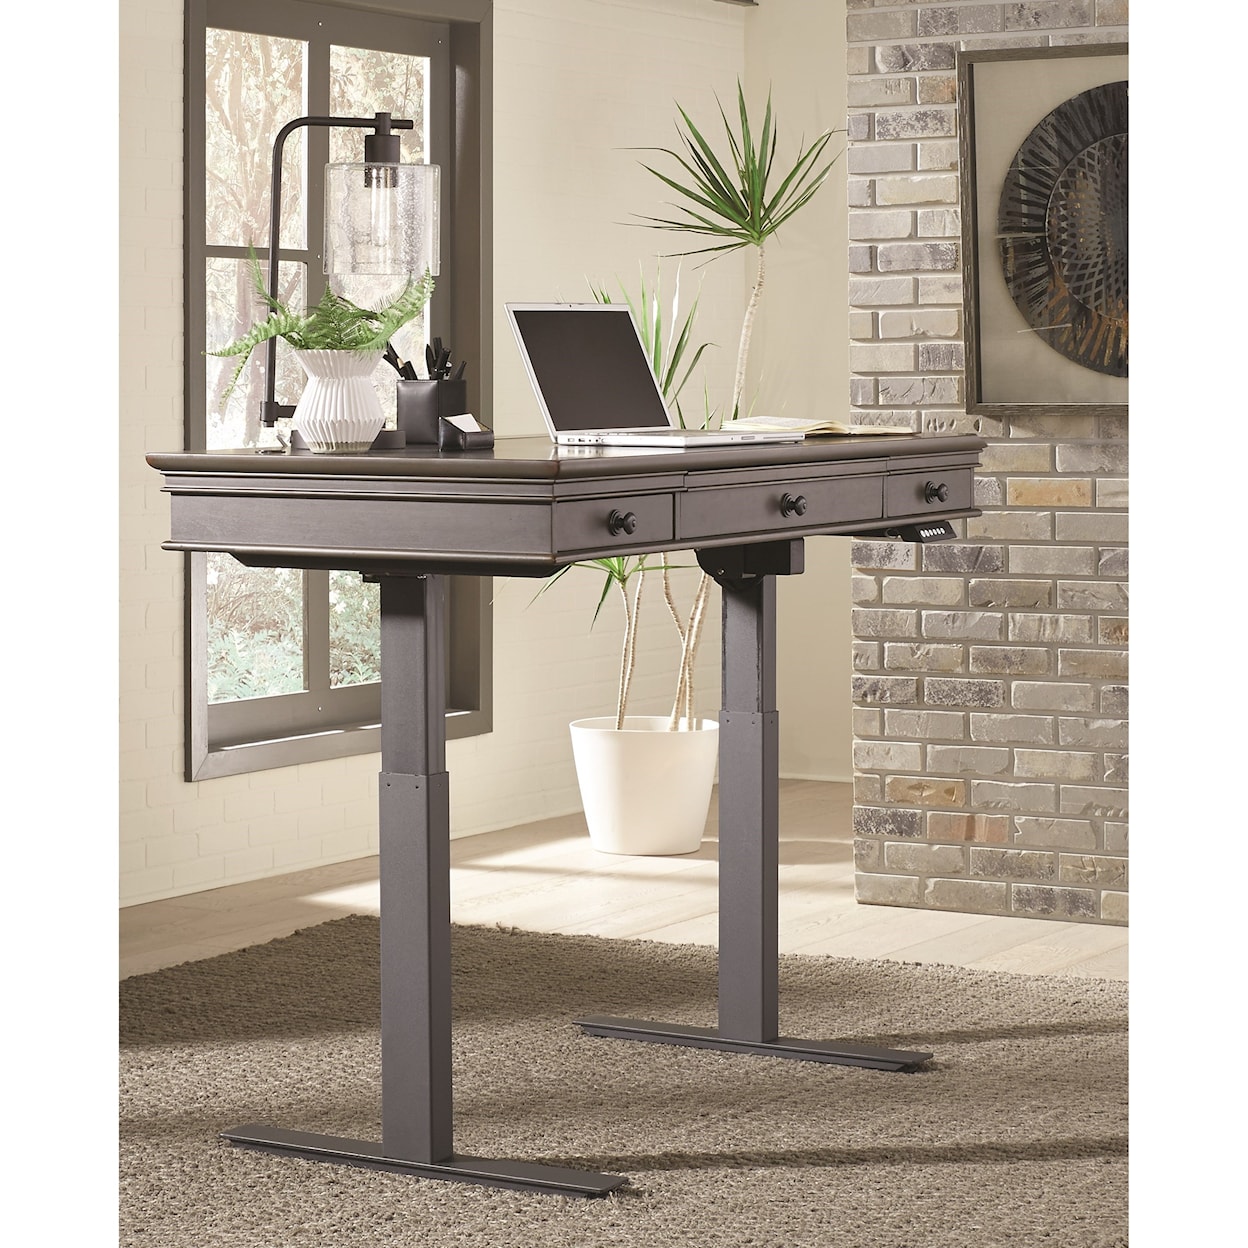 Aspenhome Oxford Lift Desk with Outlets and USB Ports